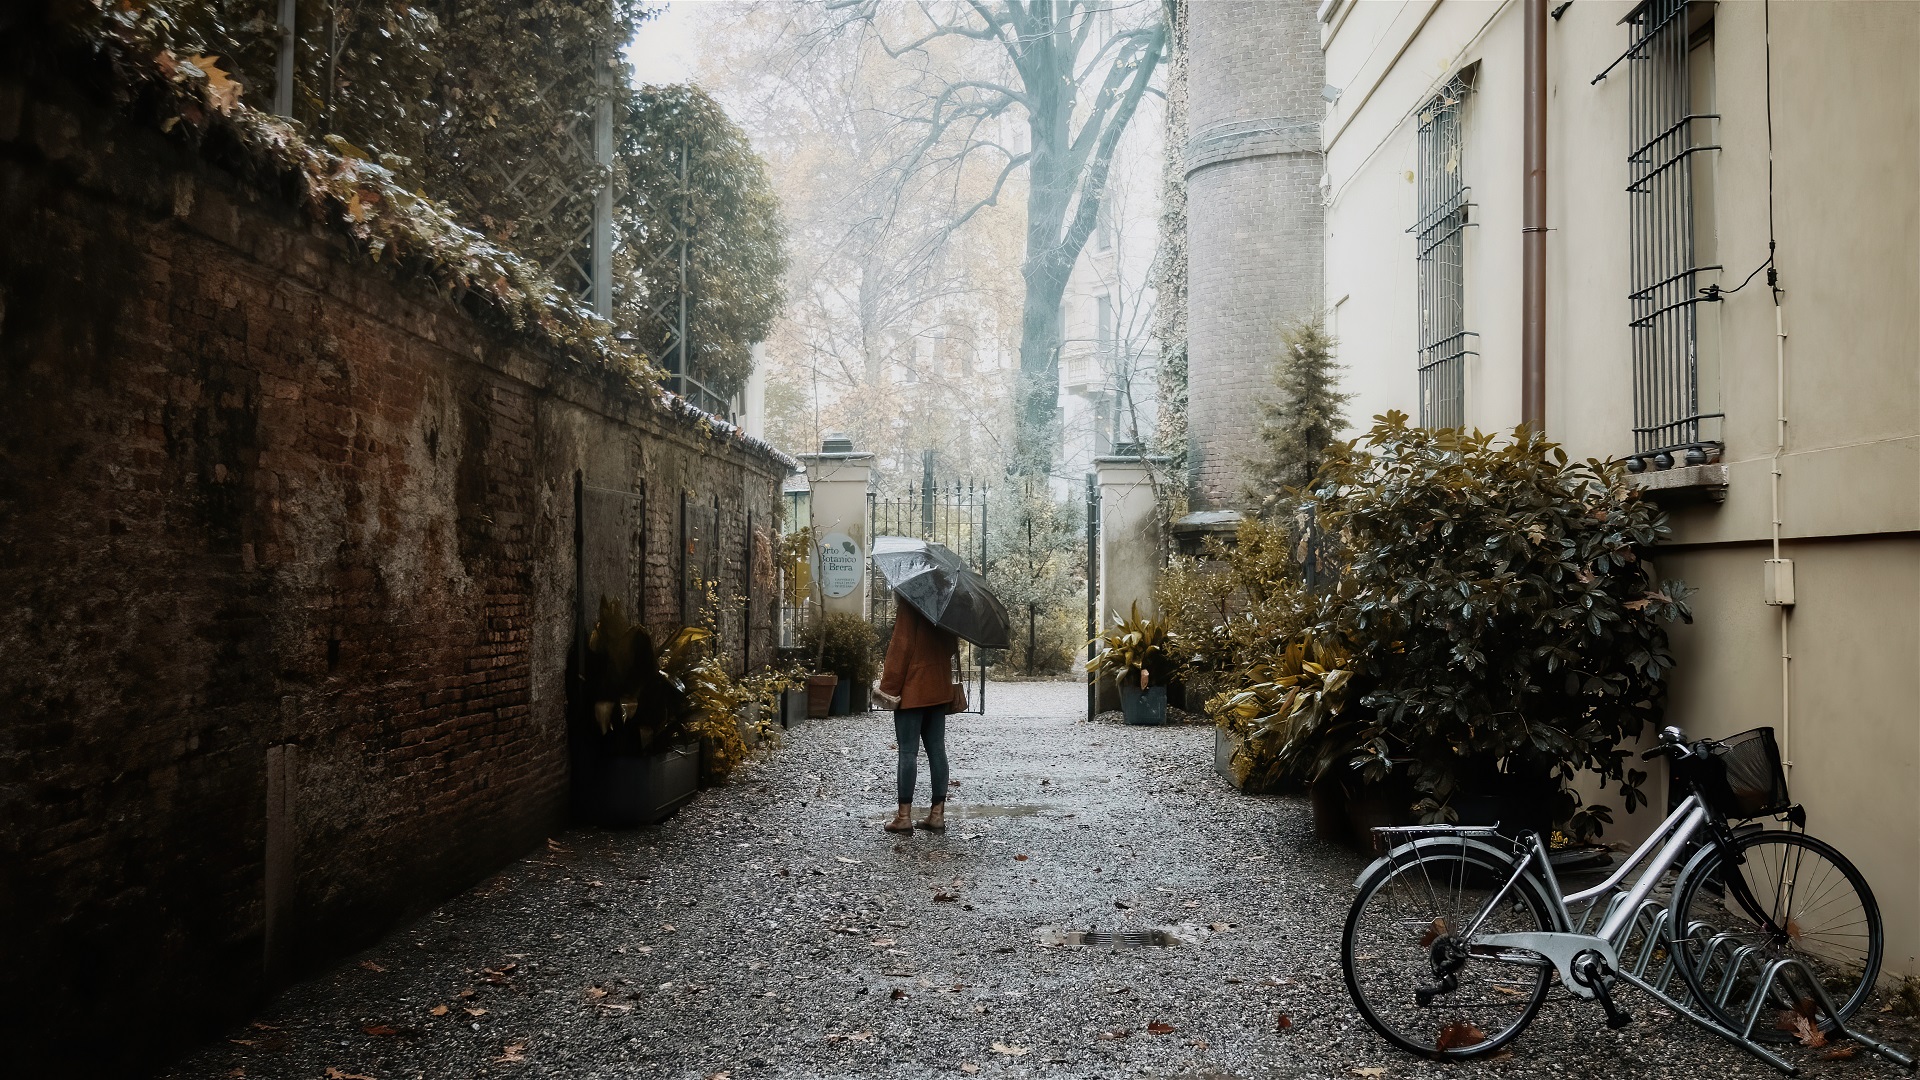 People 1920x1080 women women outdoors wall bicycle winter gates photography Paolo Barretta bushes nature urban city women with umbrella